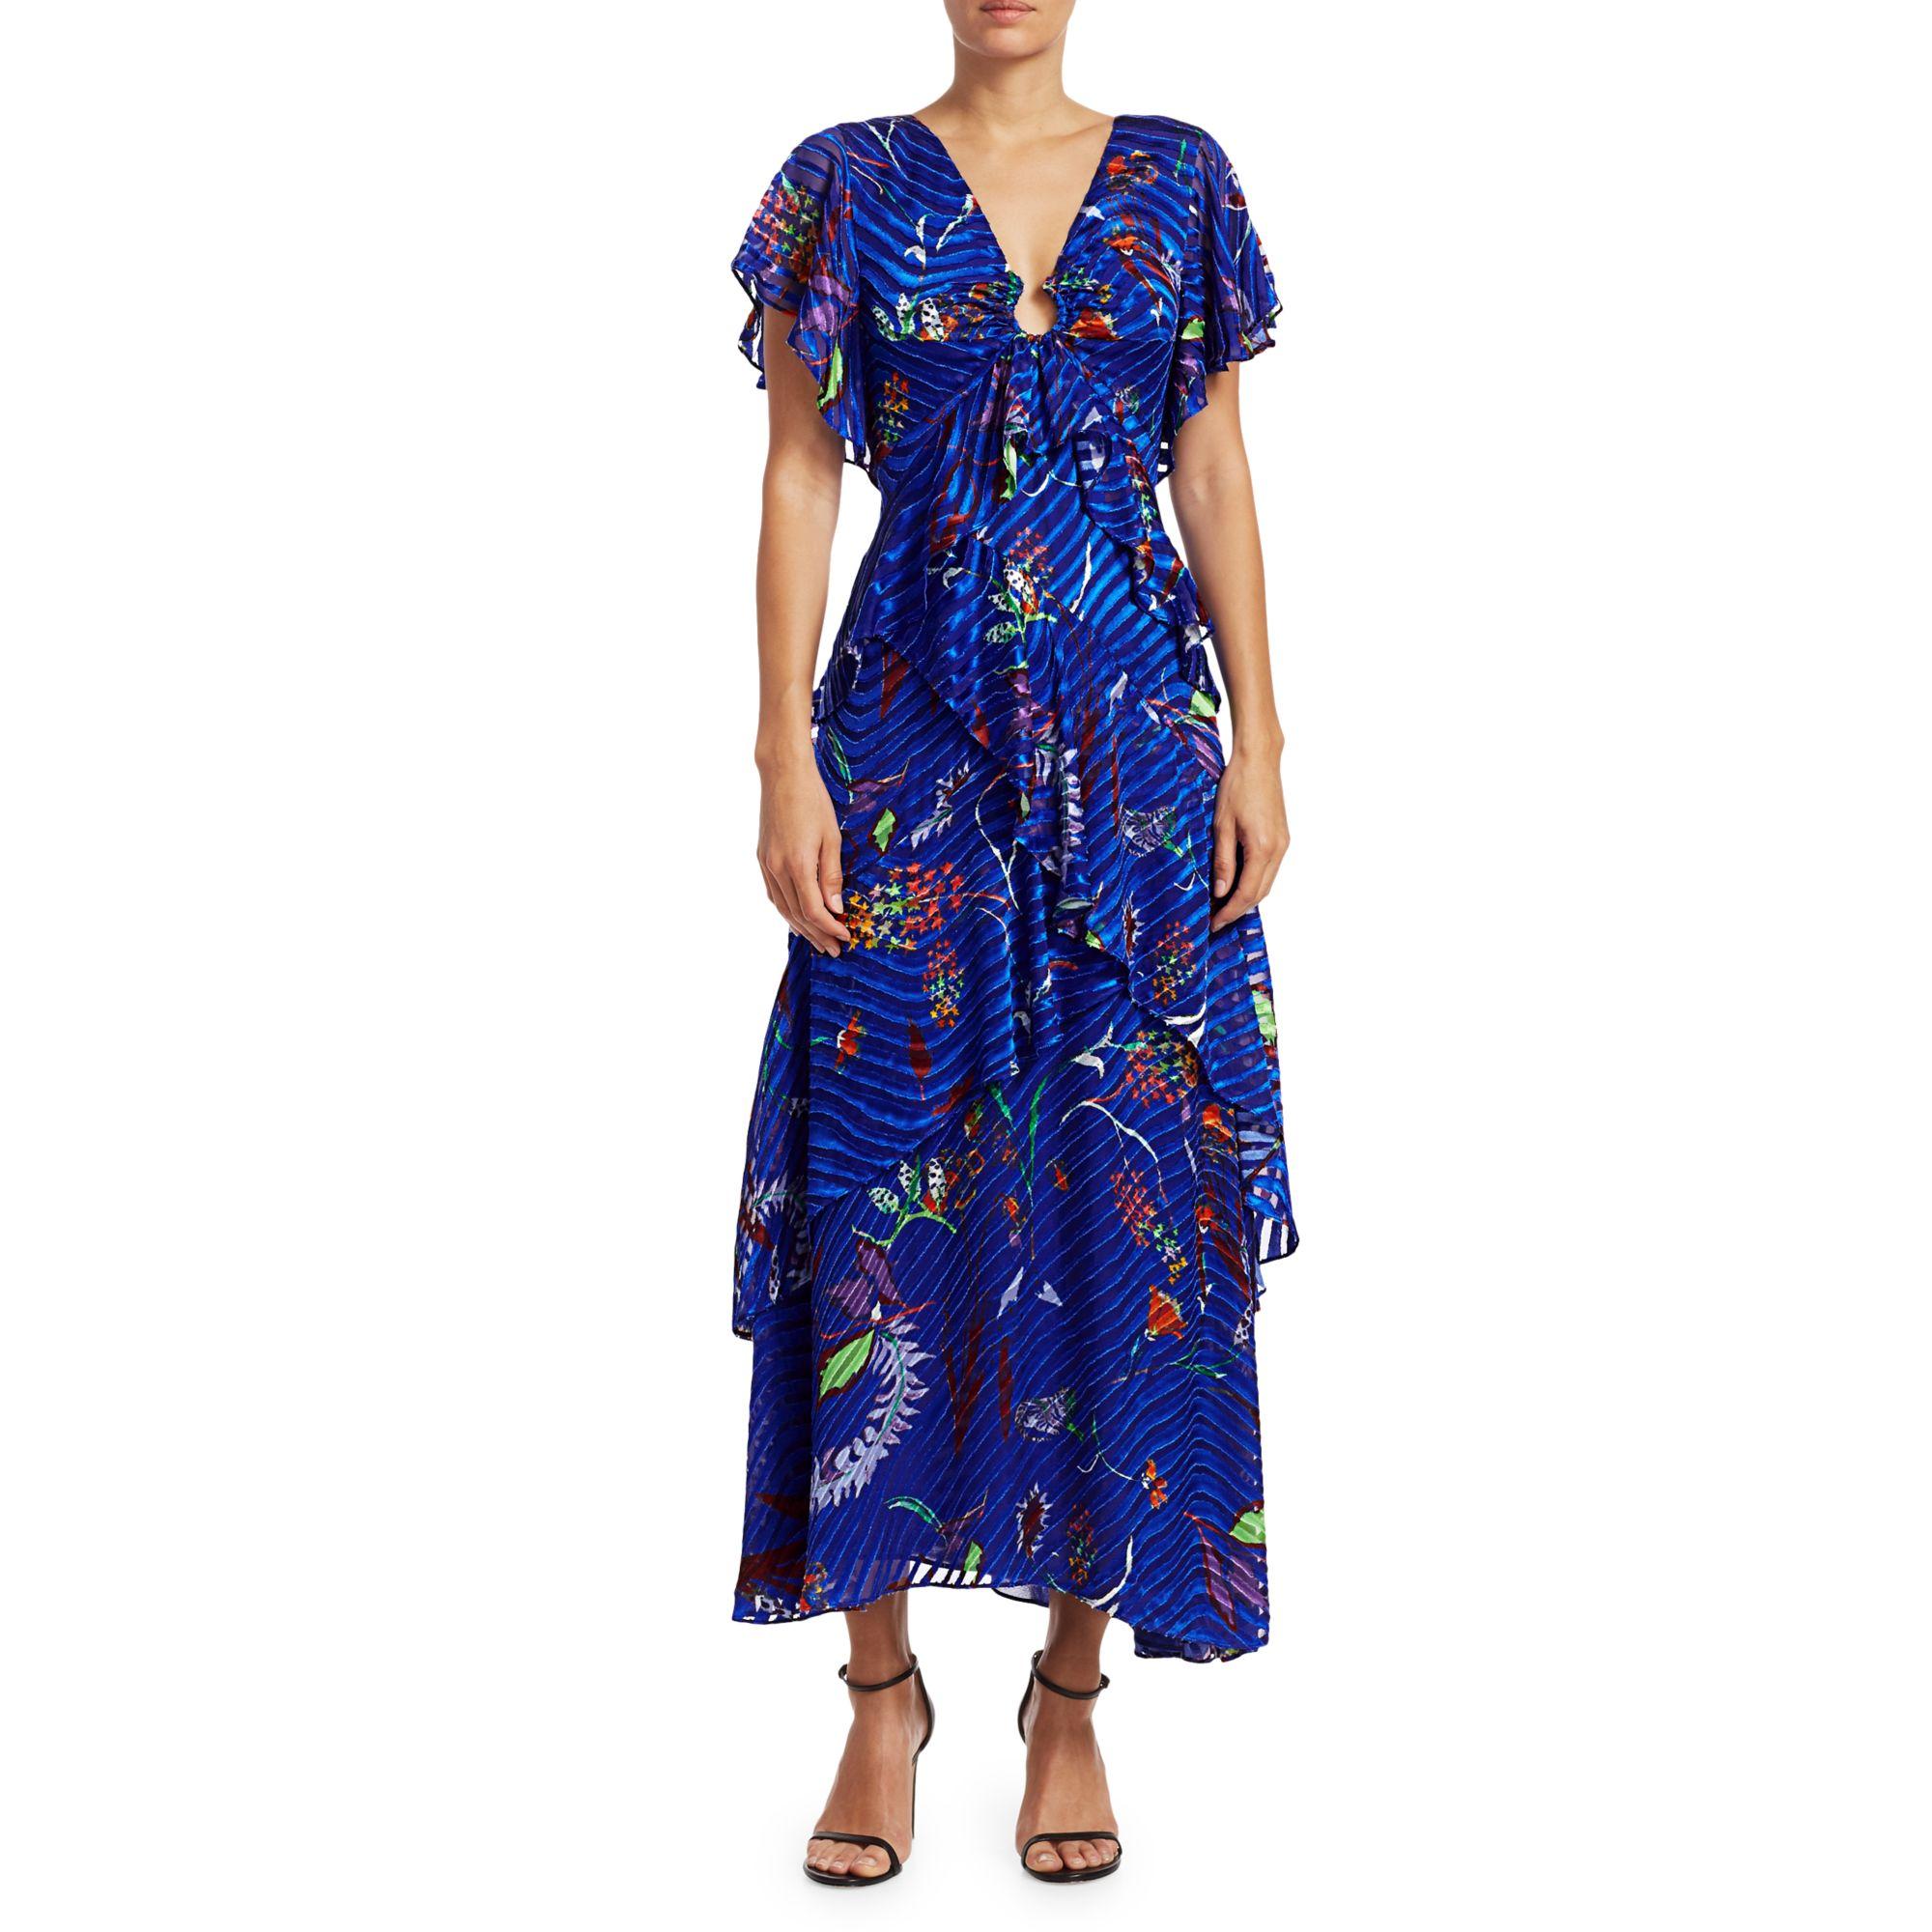 Tanya Taylor Janelle Printed Tiered Stretch-silk Maxi Dress in Blue - Lyst